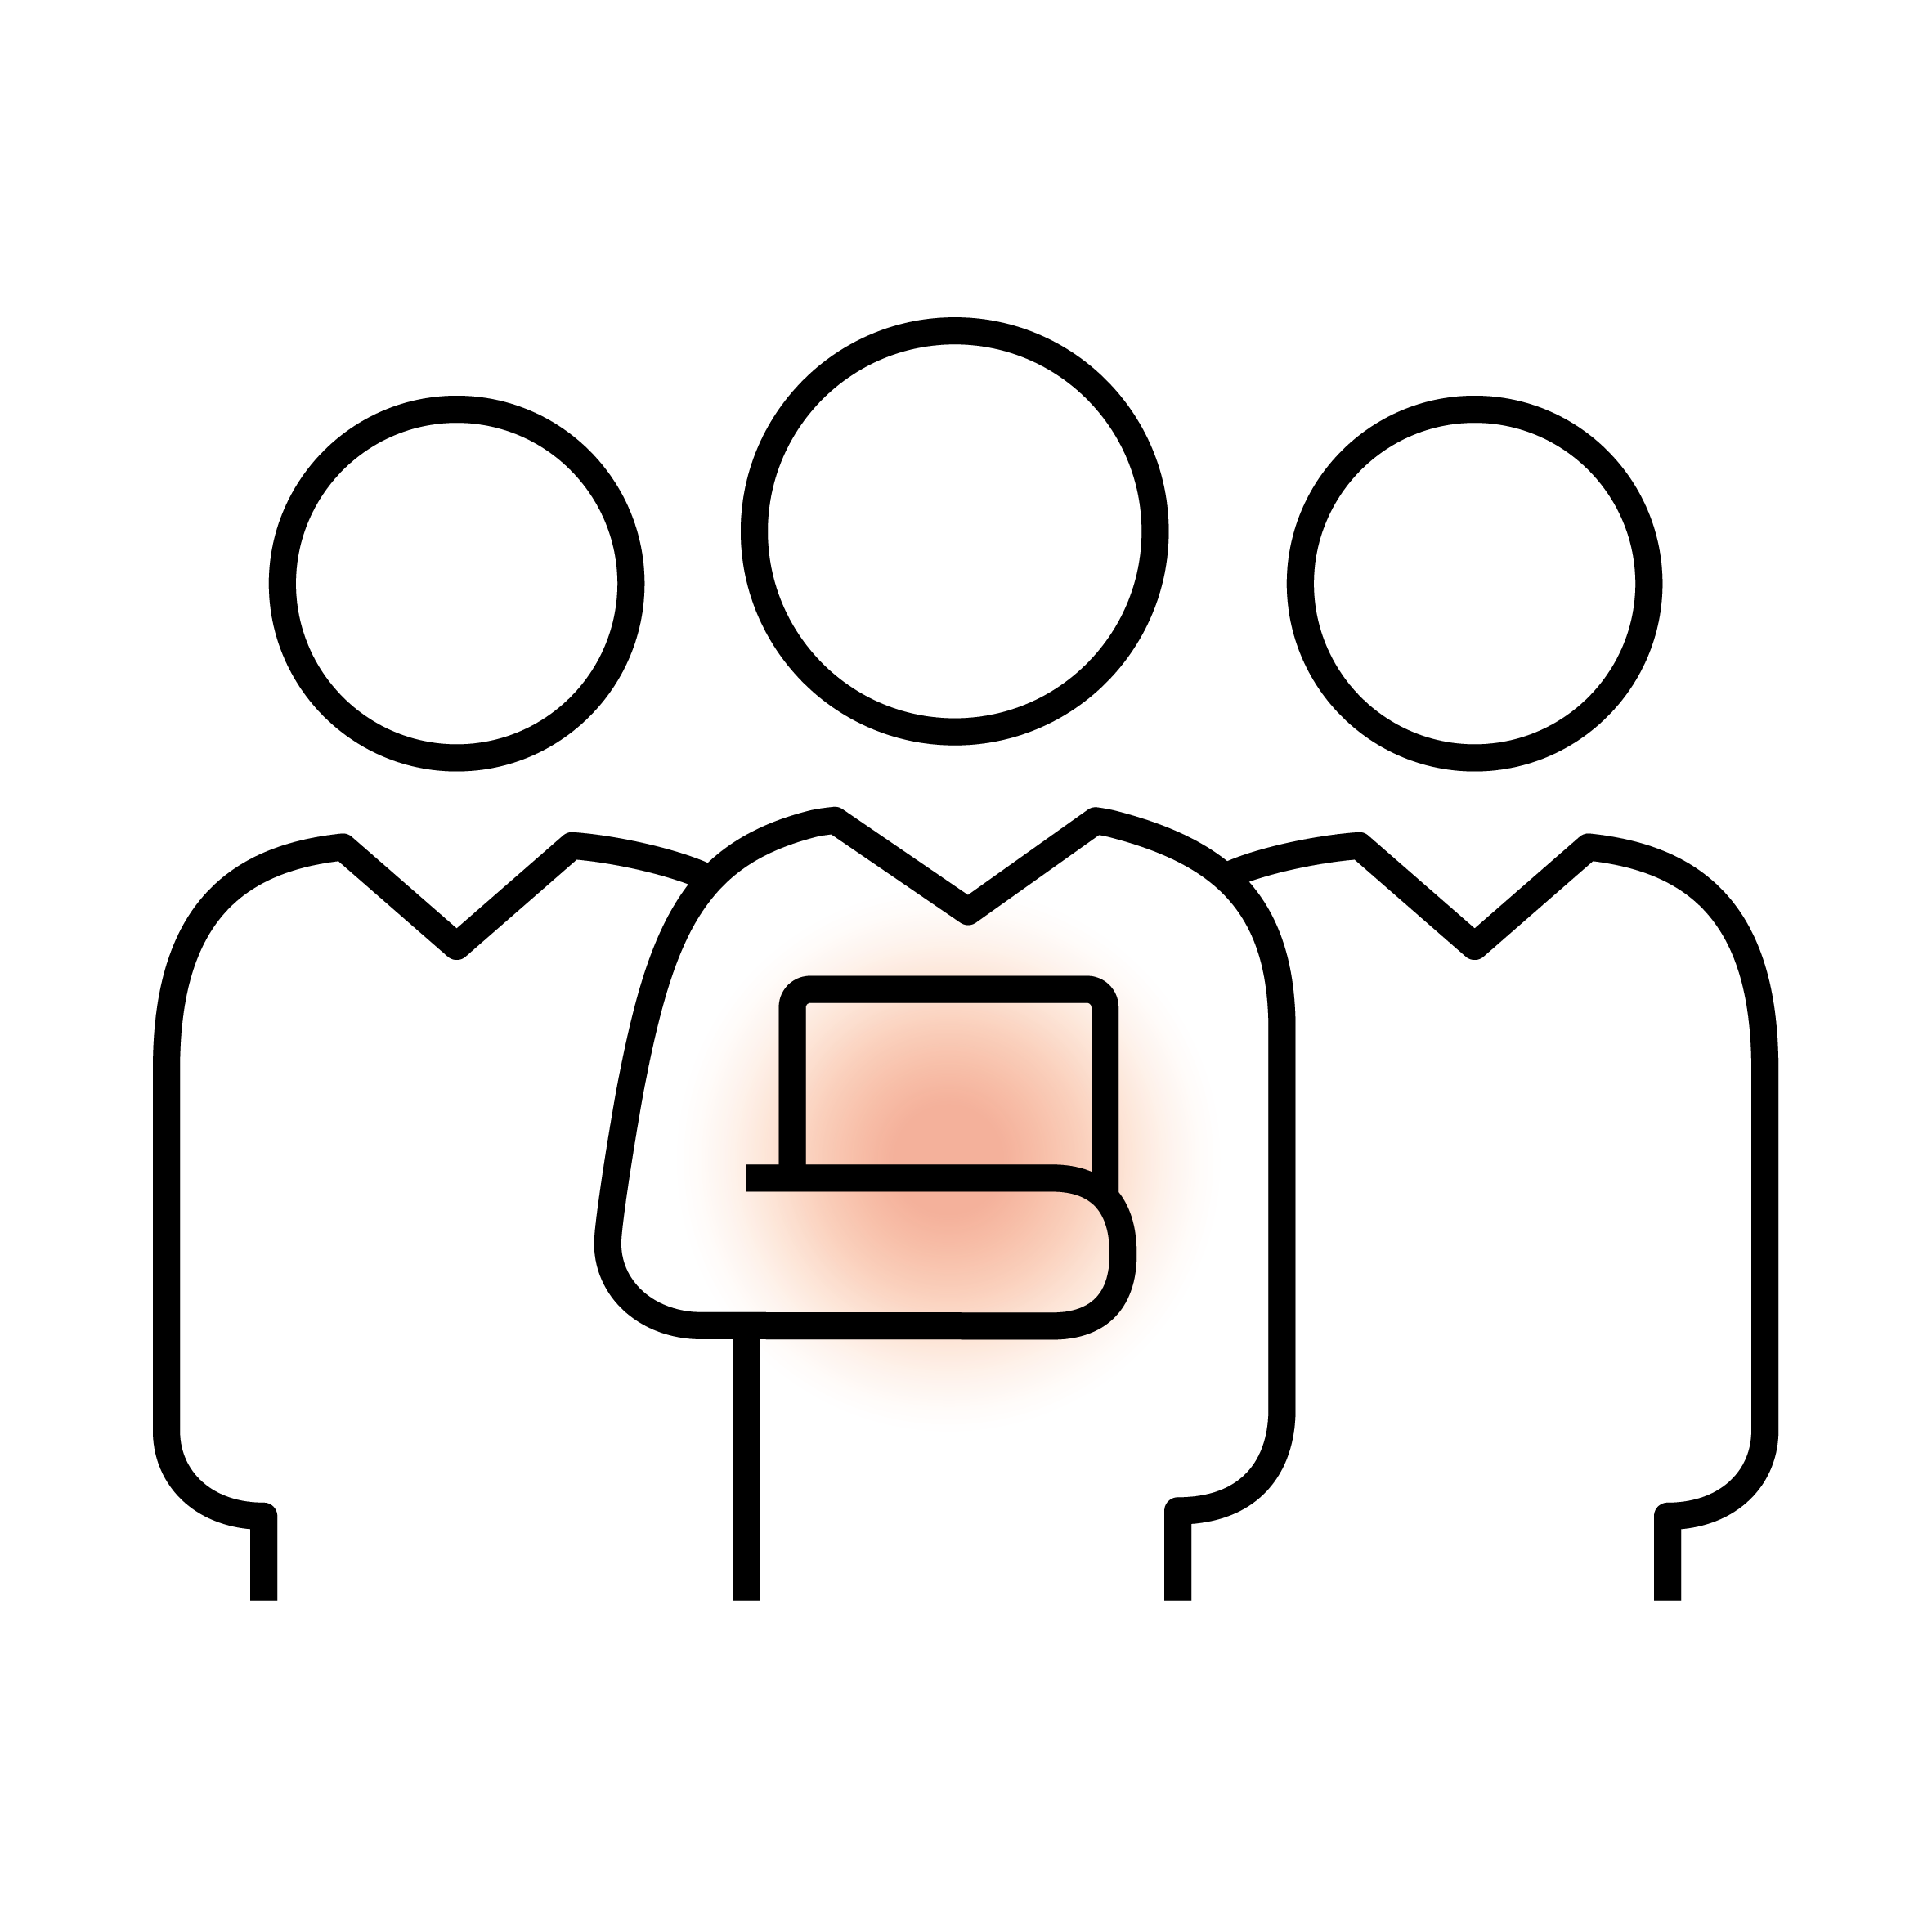 Alternative text: "Icon of three stylised people with a selected member in the middle for teamwork and leadership."